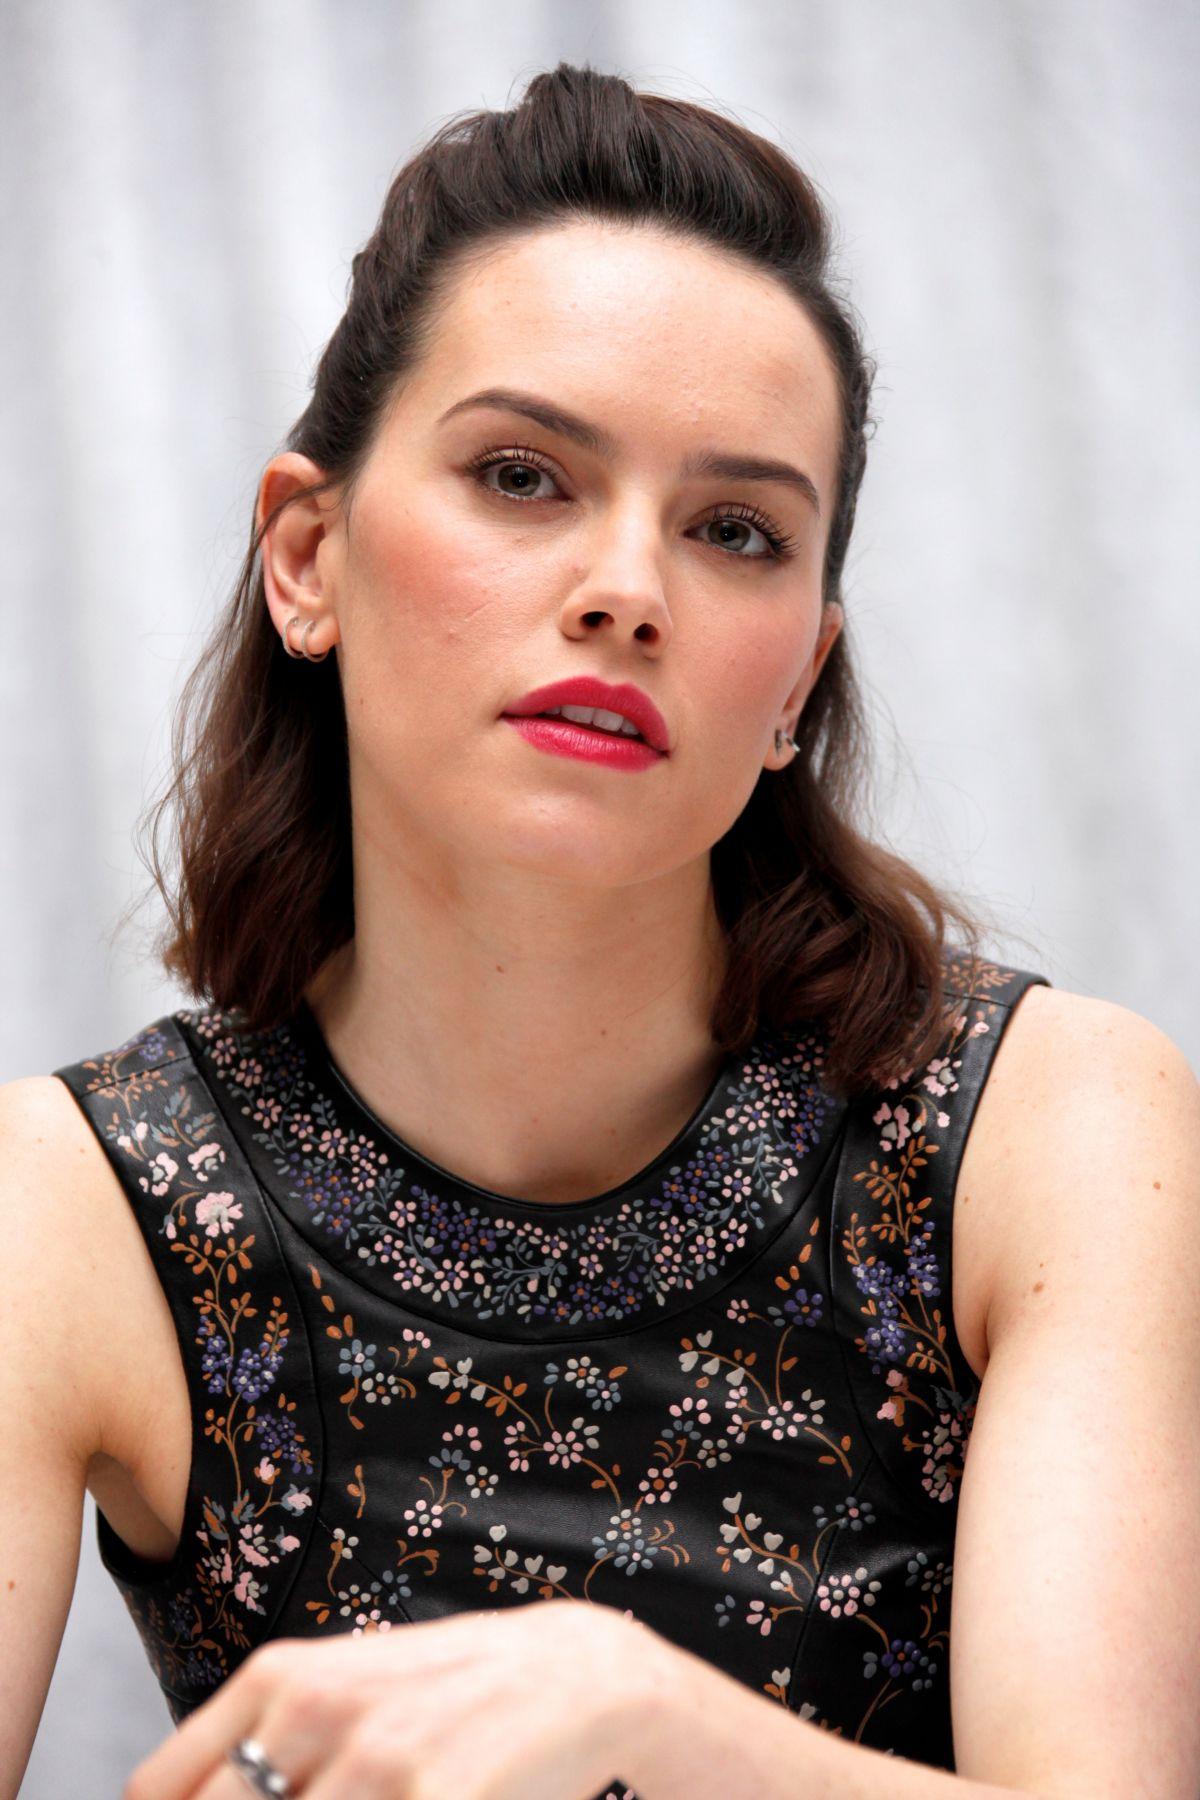 Free download Daisy Ridley wallpaper for iPhone Android